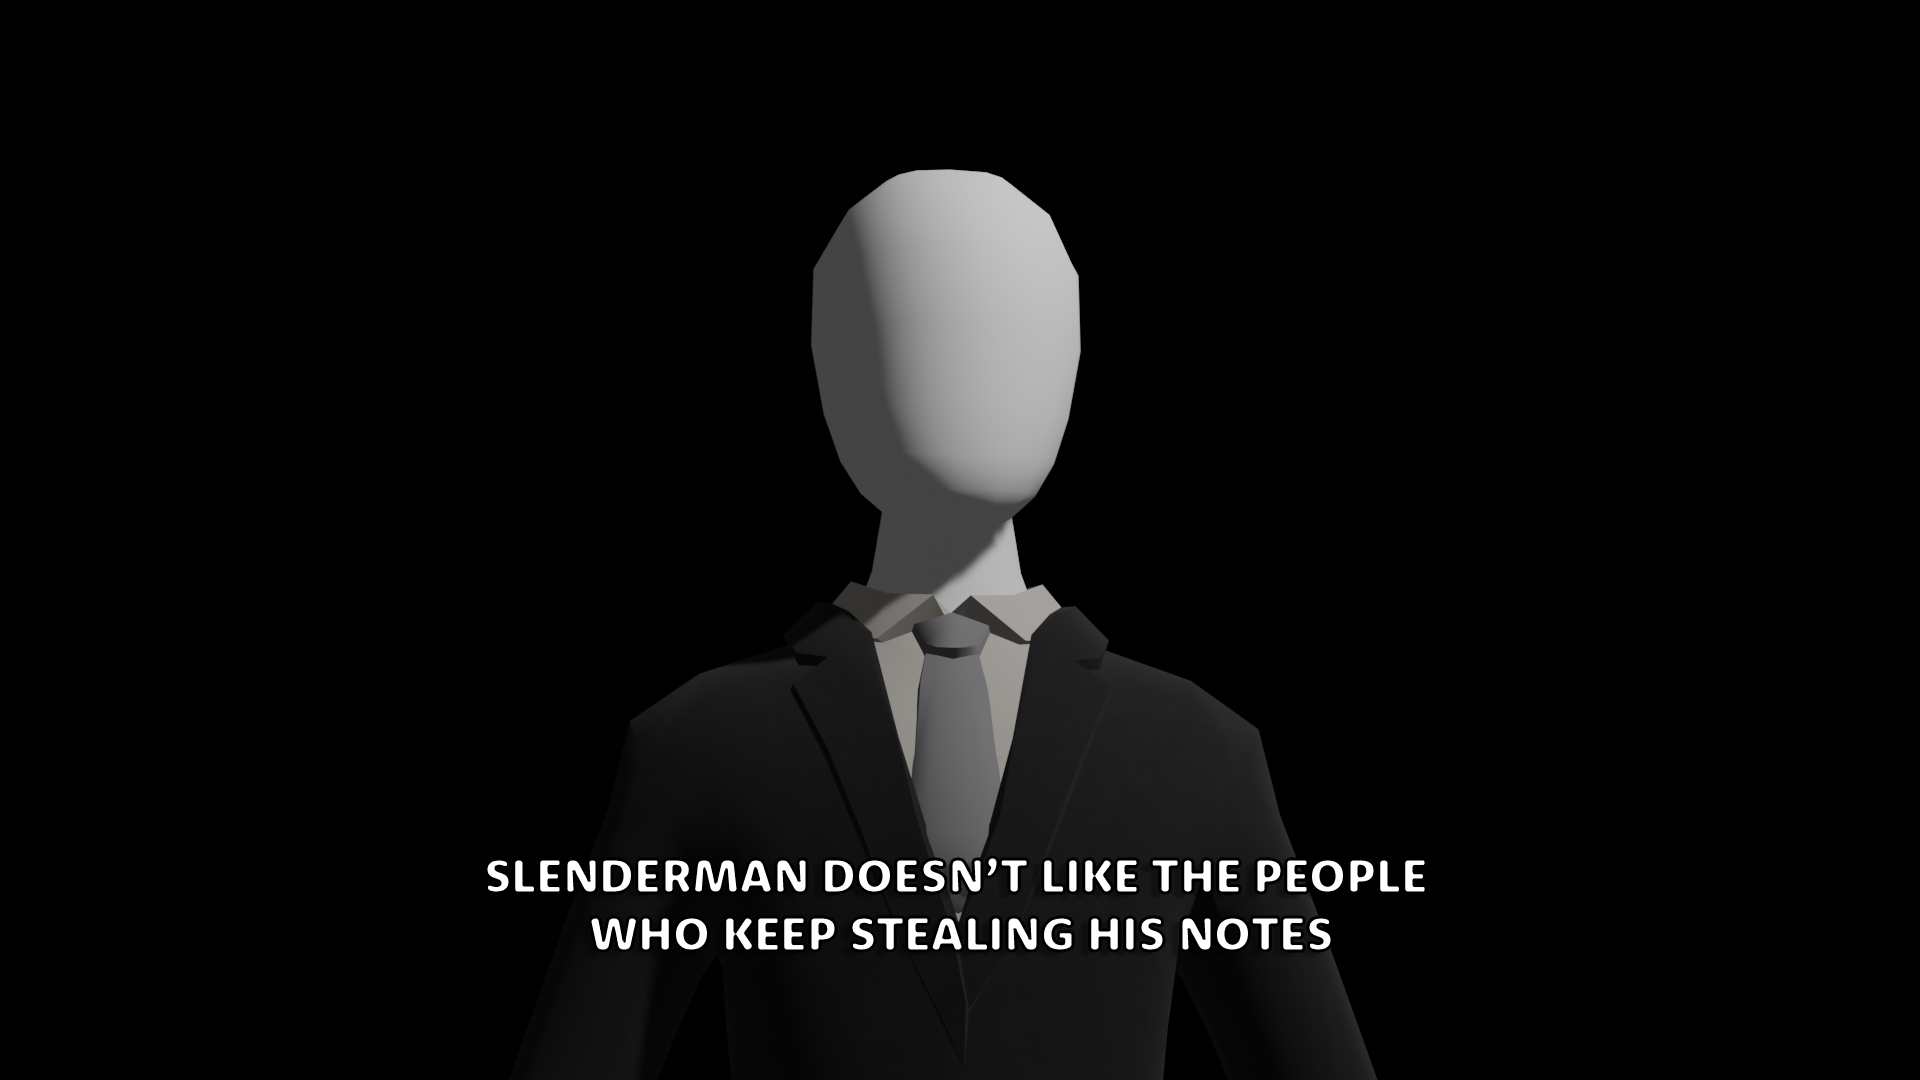 Slenderman doesn’t like the people who keep stealing his notes